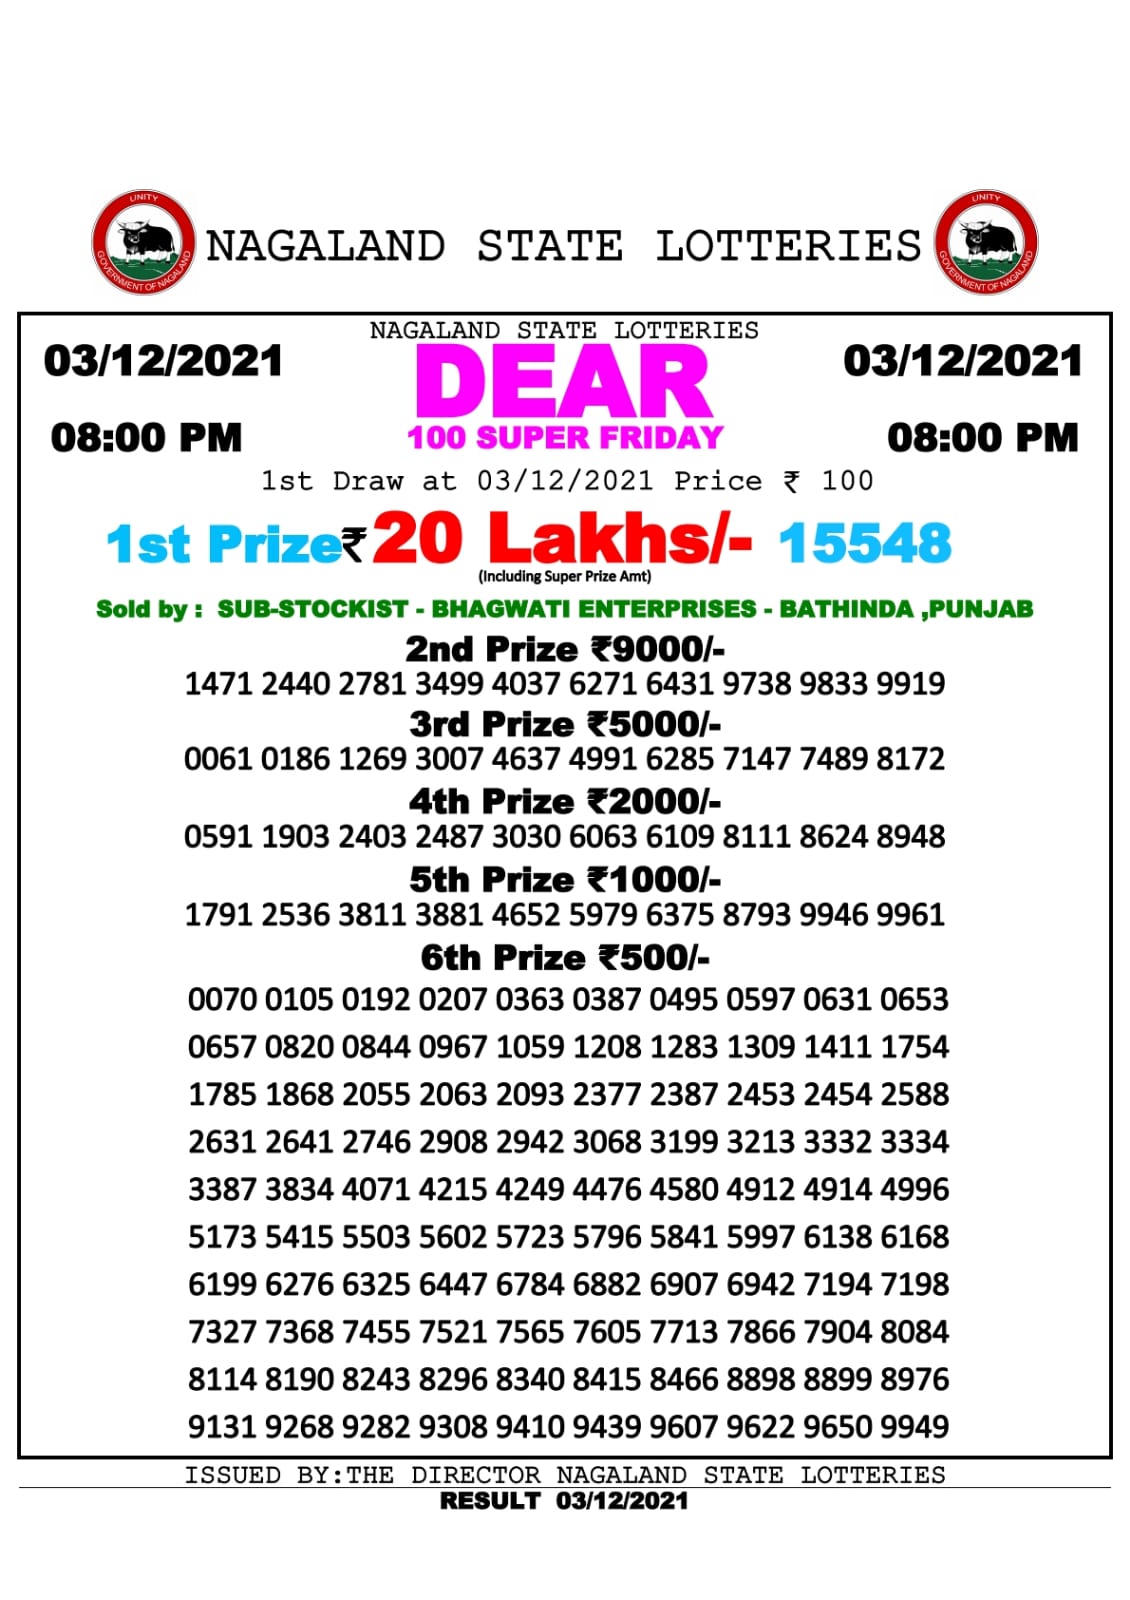 NAGALLAND STATE DEAR 100 SUPER WEEKLY LOTTERY 8 pm 03.12.2021